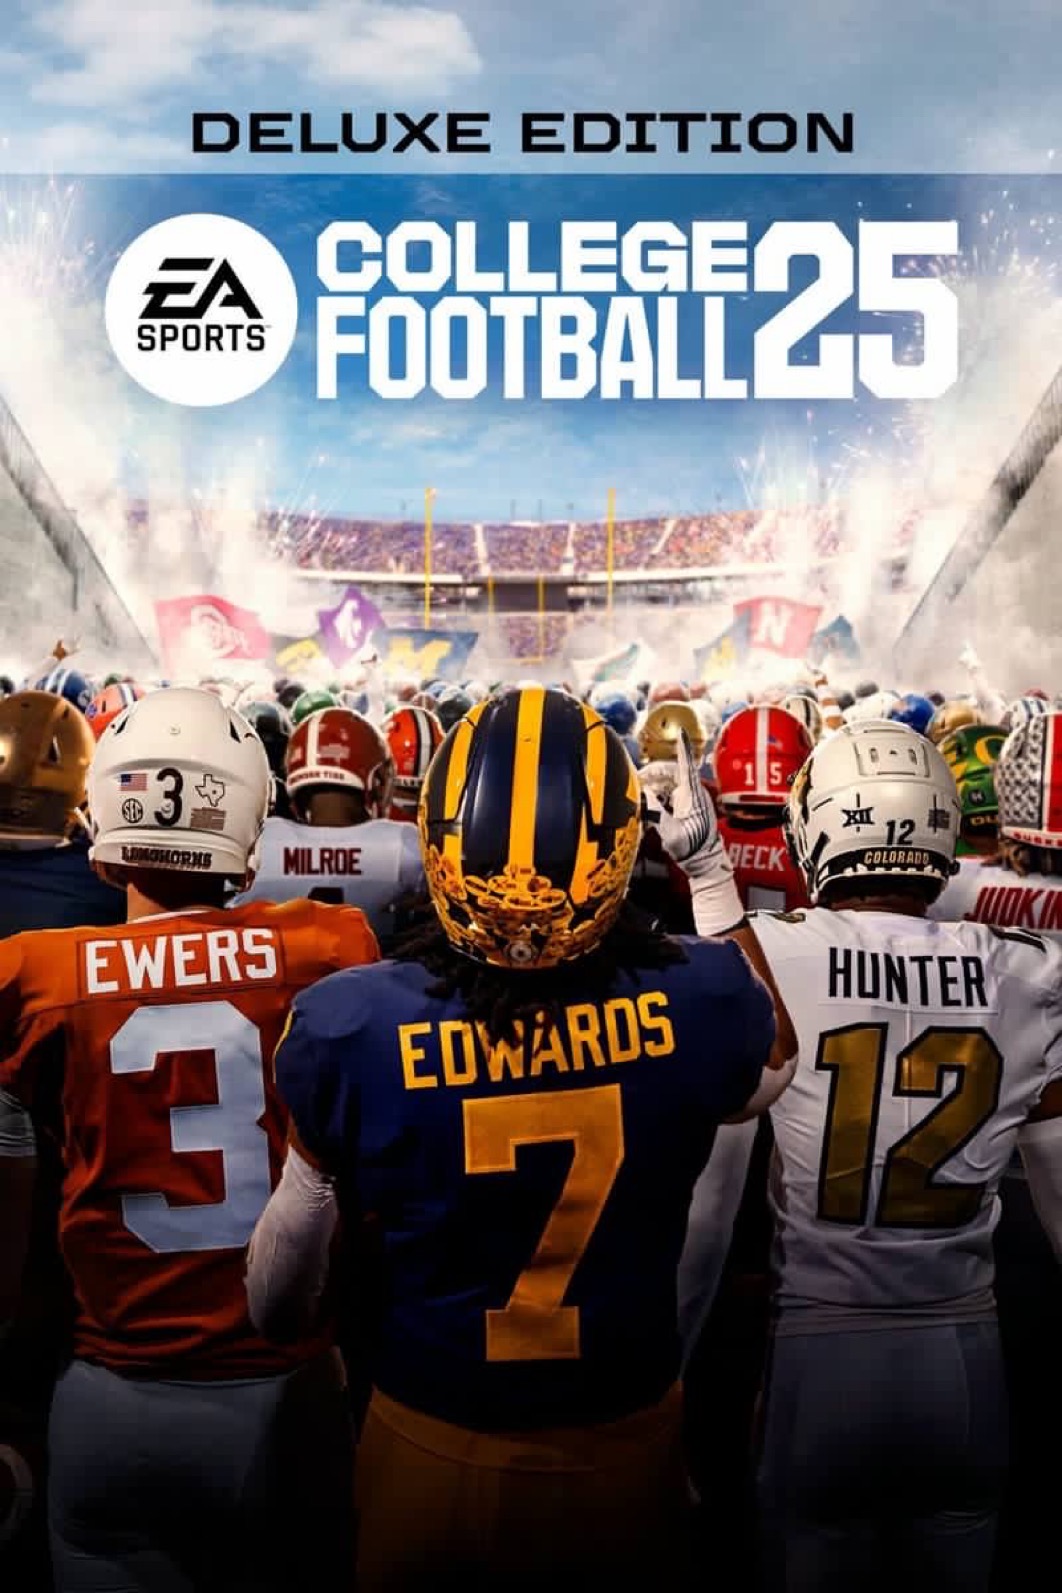 PlayStation Store Leak Reveals College Football 25 Deluxe Cover